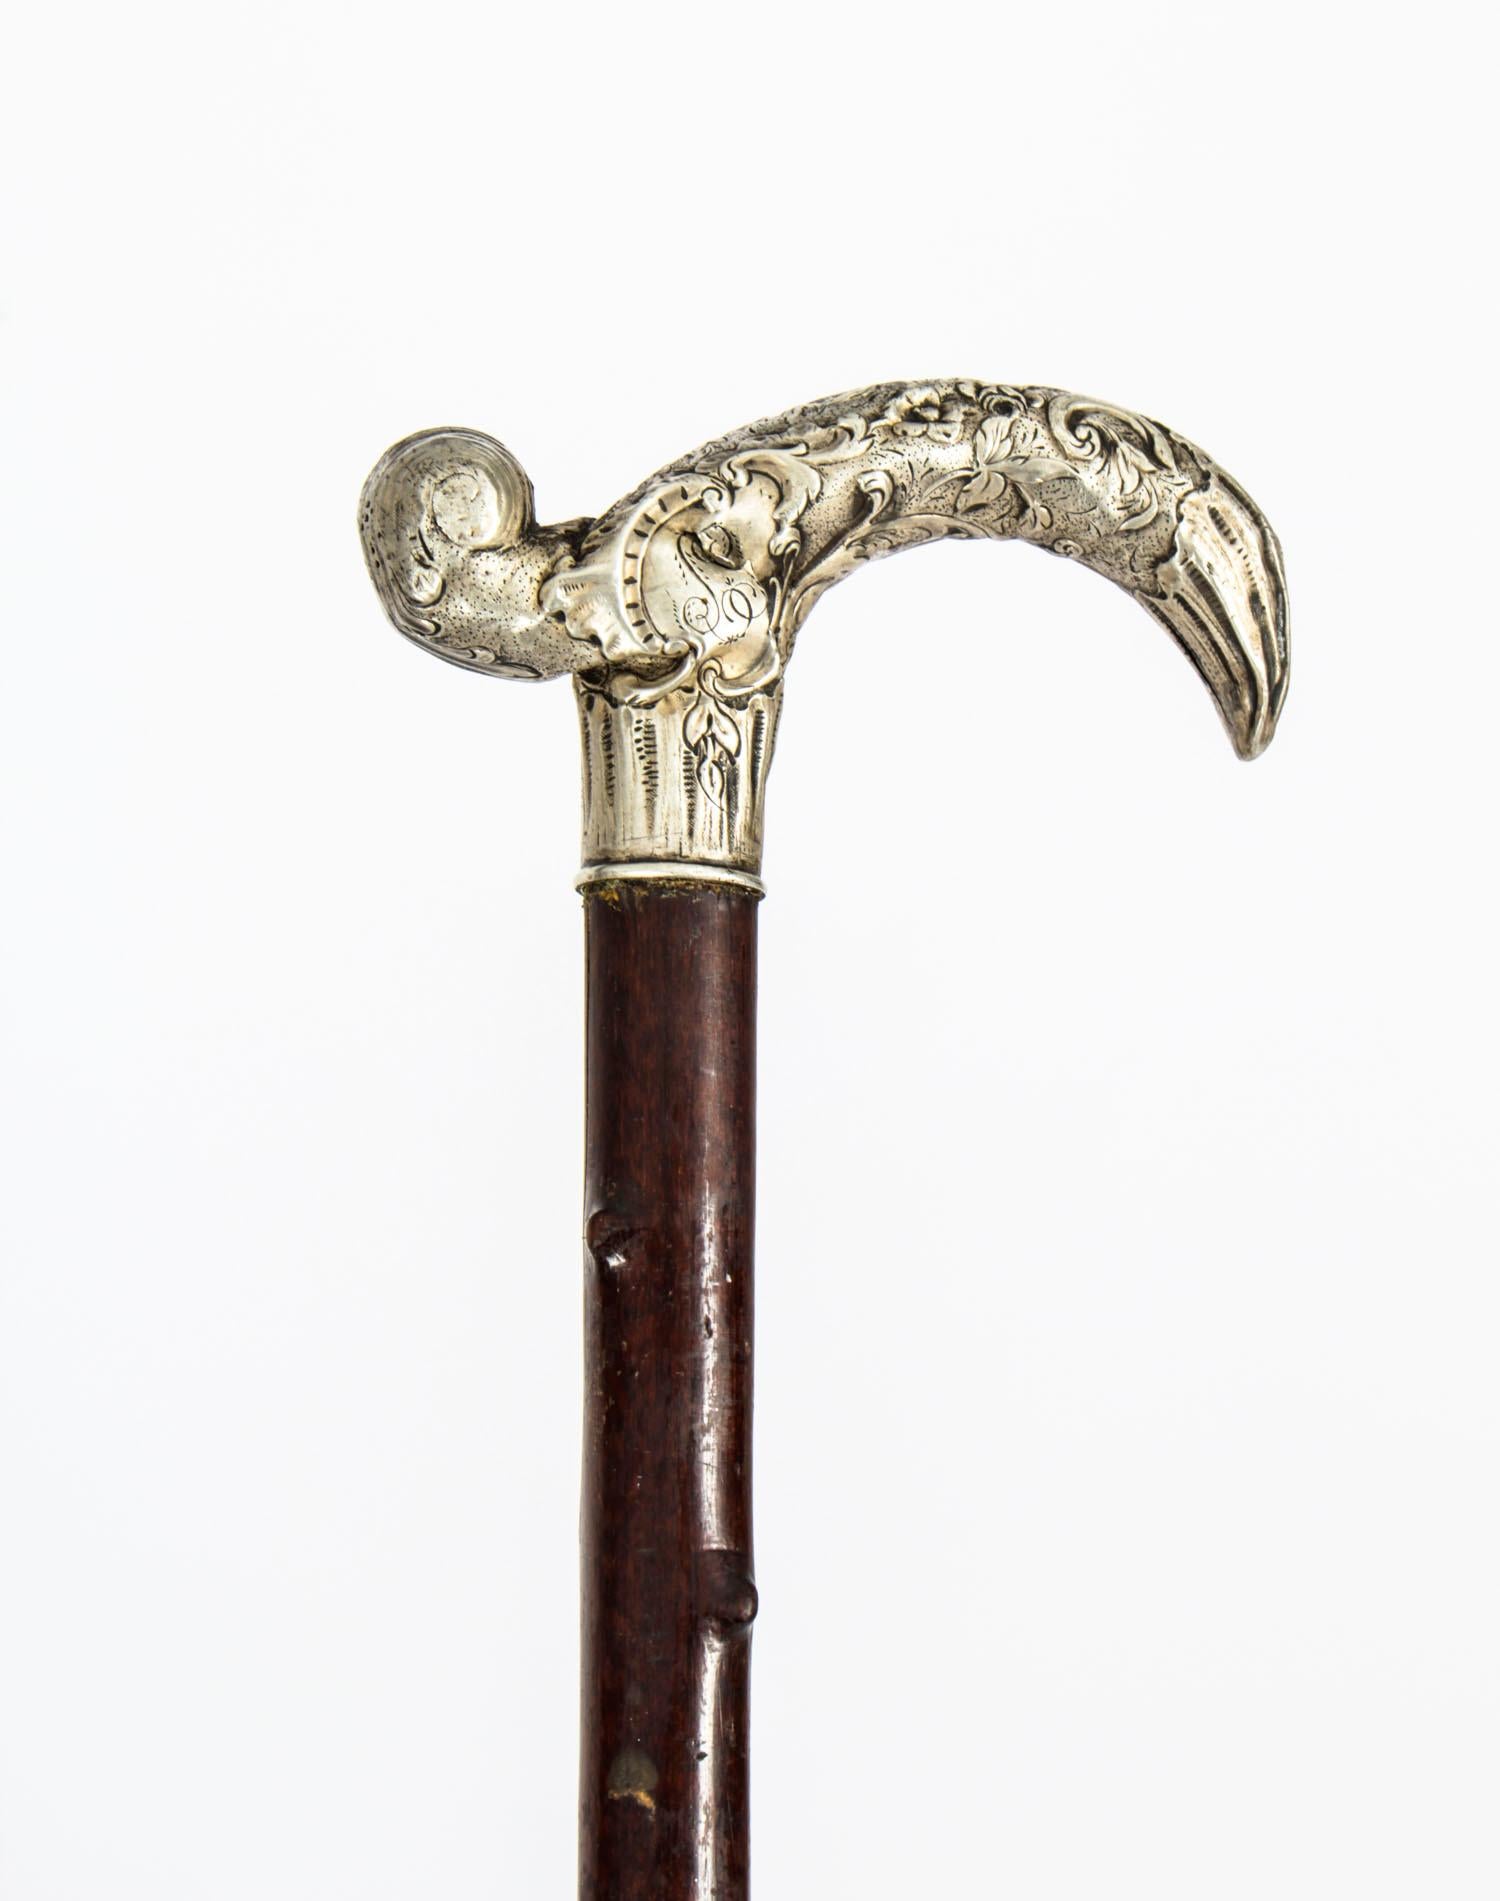 This is a beautiful antique Victorian silver plated handled walking stick circa 1890 in date.

It features a elaborately cast derby shape handle decorated with foliated and floral ornamentation. The sturdy Malacca tapering textured shaft features